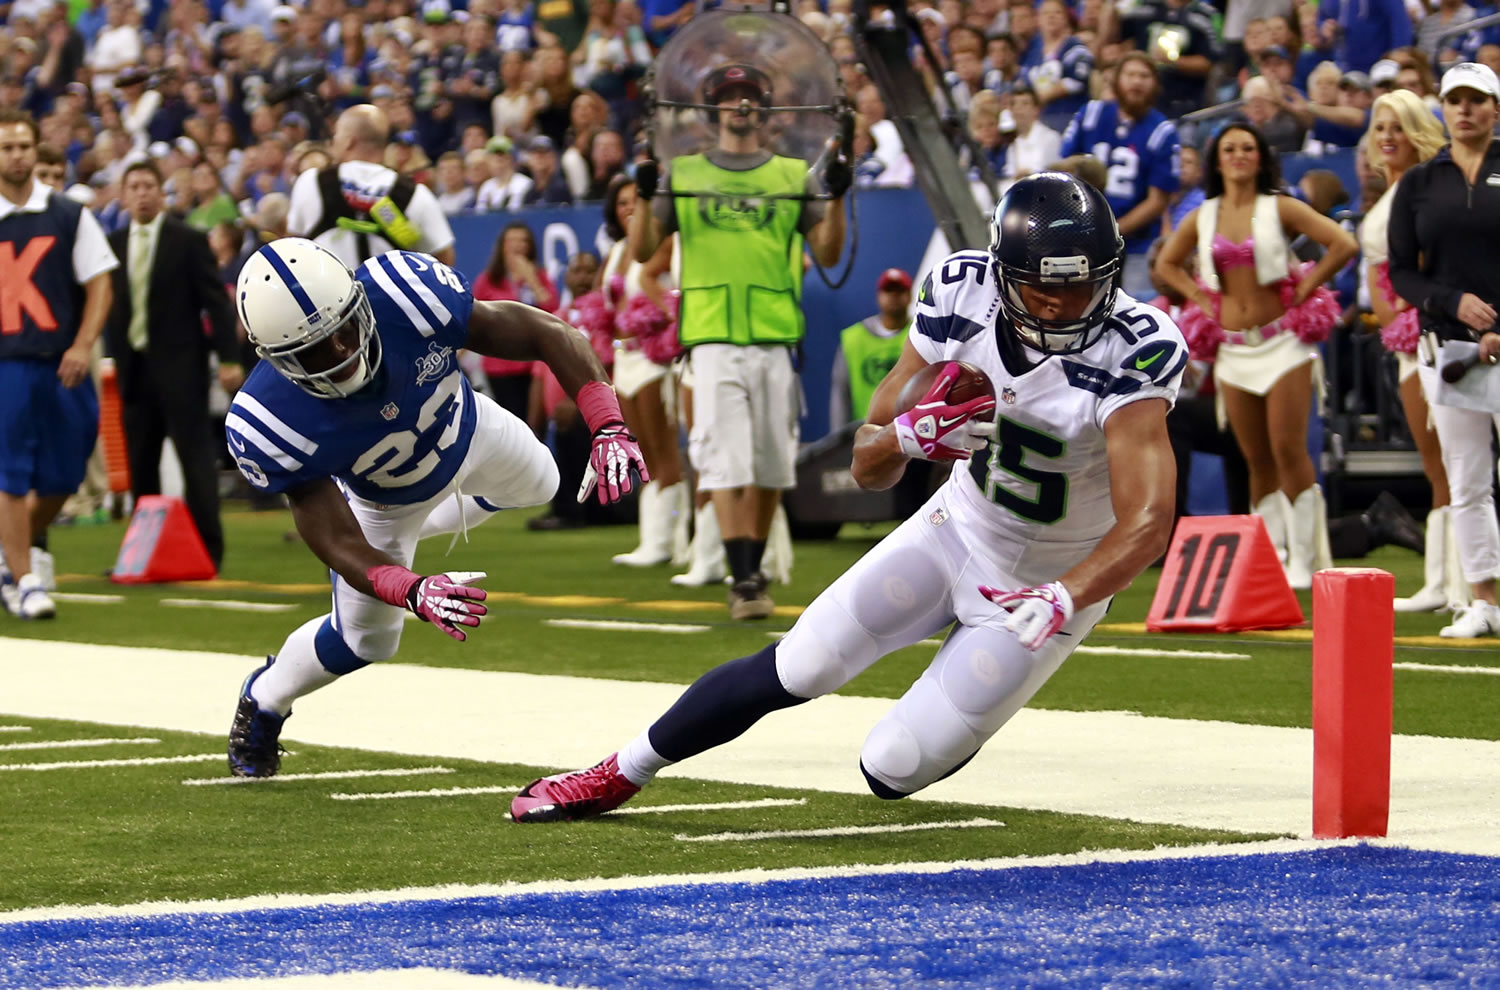 Seattle Seahawks wide receiver Jermaine Kearse, right, scores a touchdown on a catch in front of Indianapolis Colts cornerback Vontae Davis during the first half Sunday.